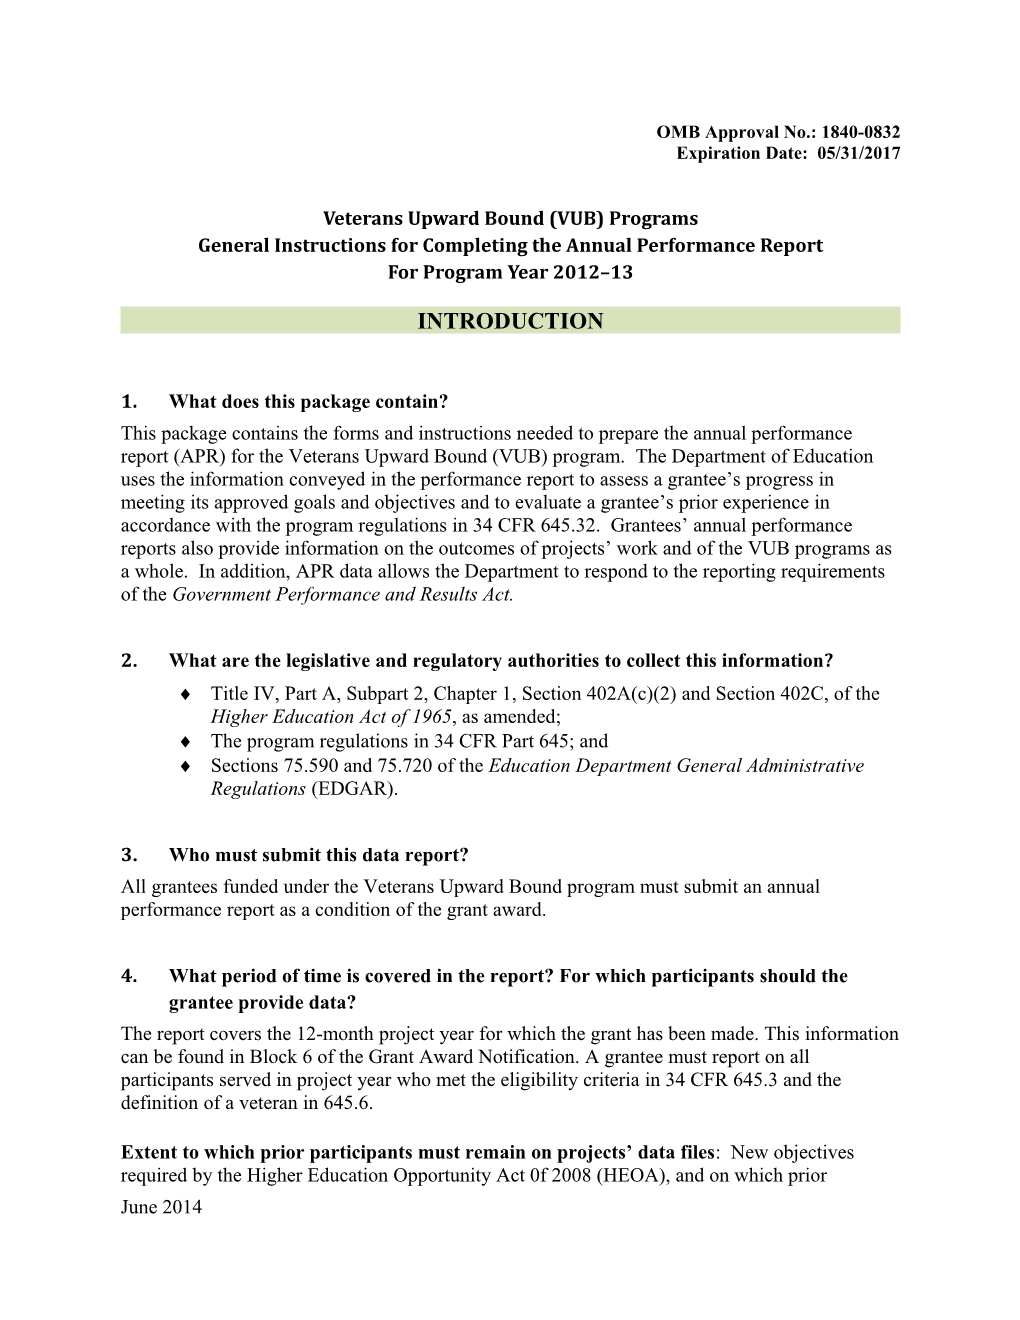 2012-2013 Annual Performance Report Instructions for the Veterans Upward Bound Program (MS Word)